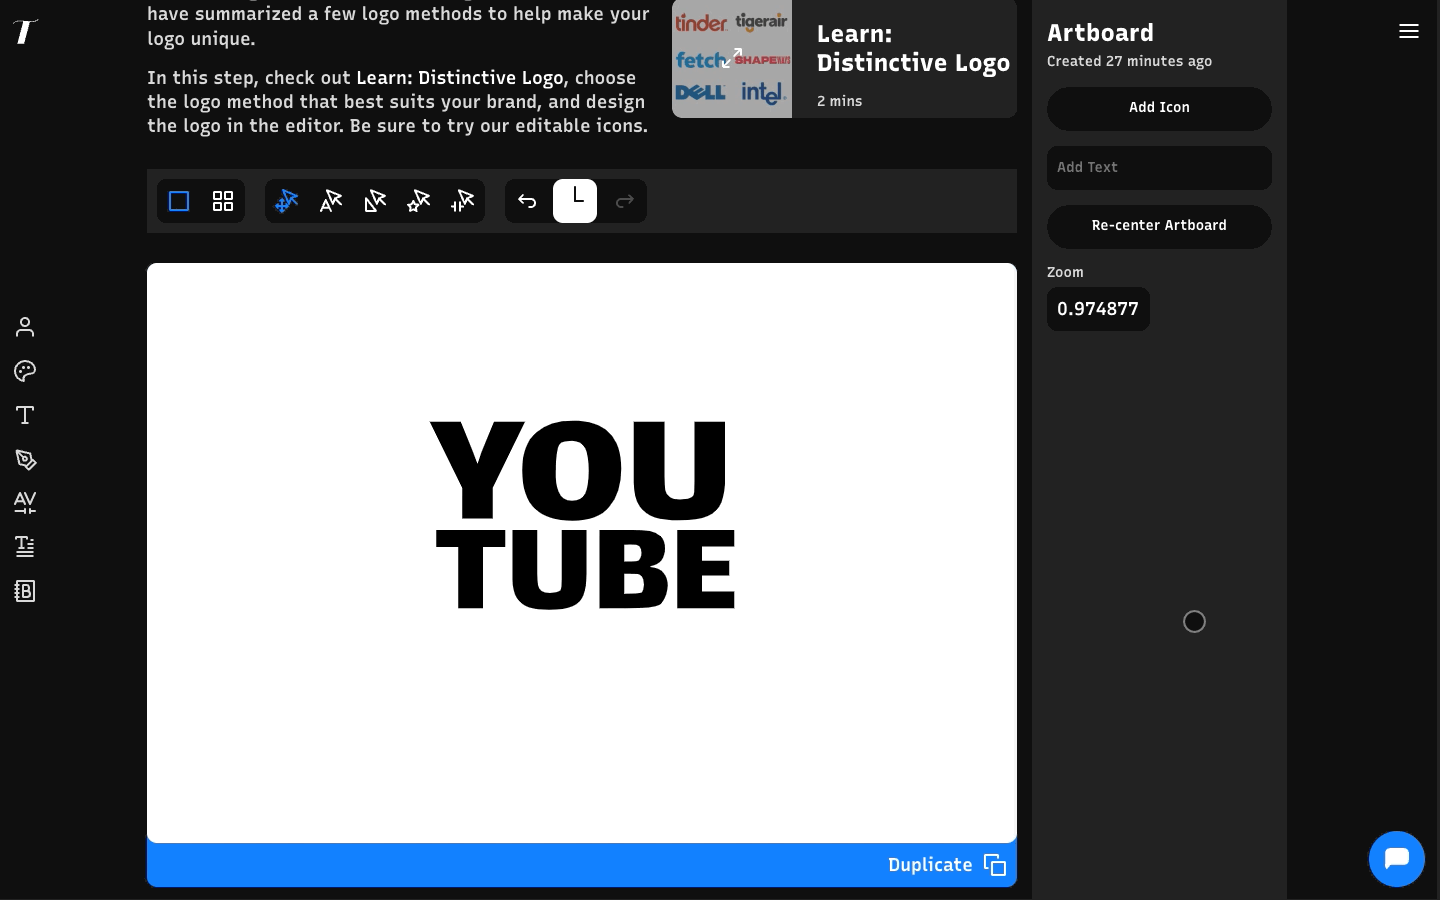 Adding extra lines of text in our logo editor